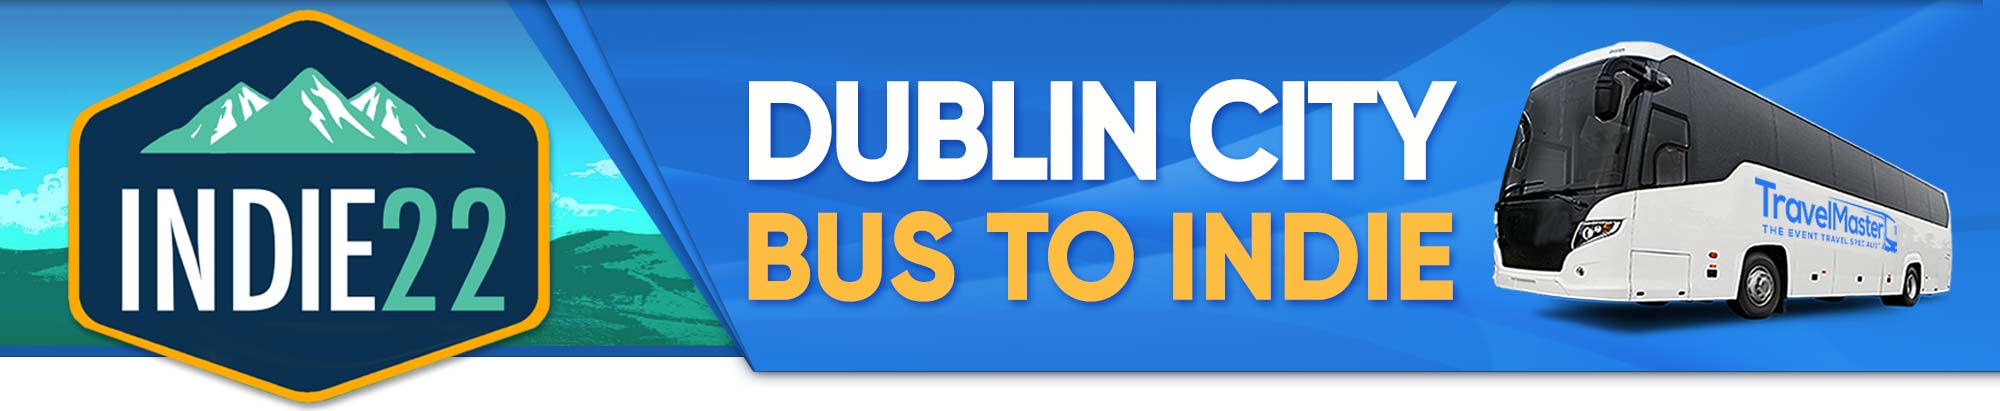 Bus from Dublin to Indie 22